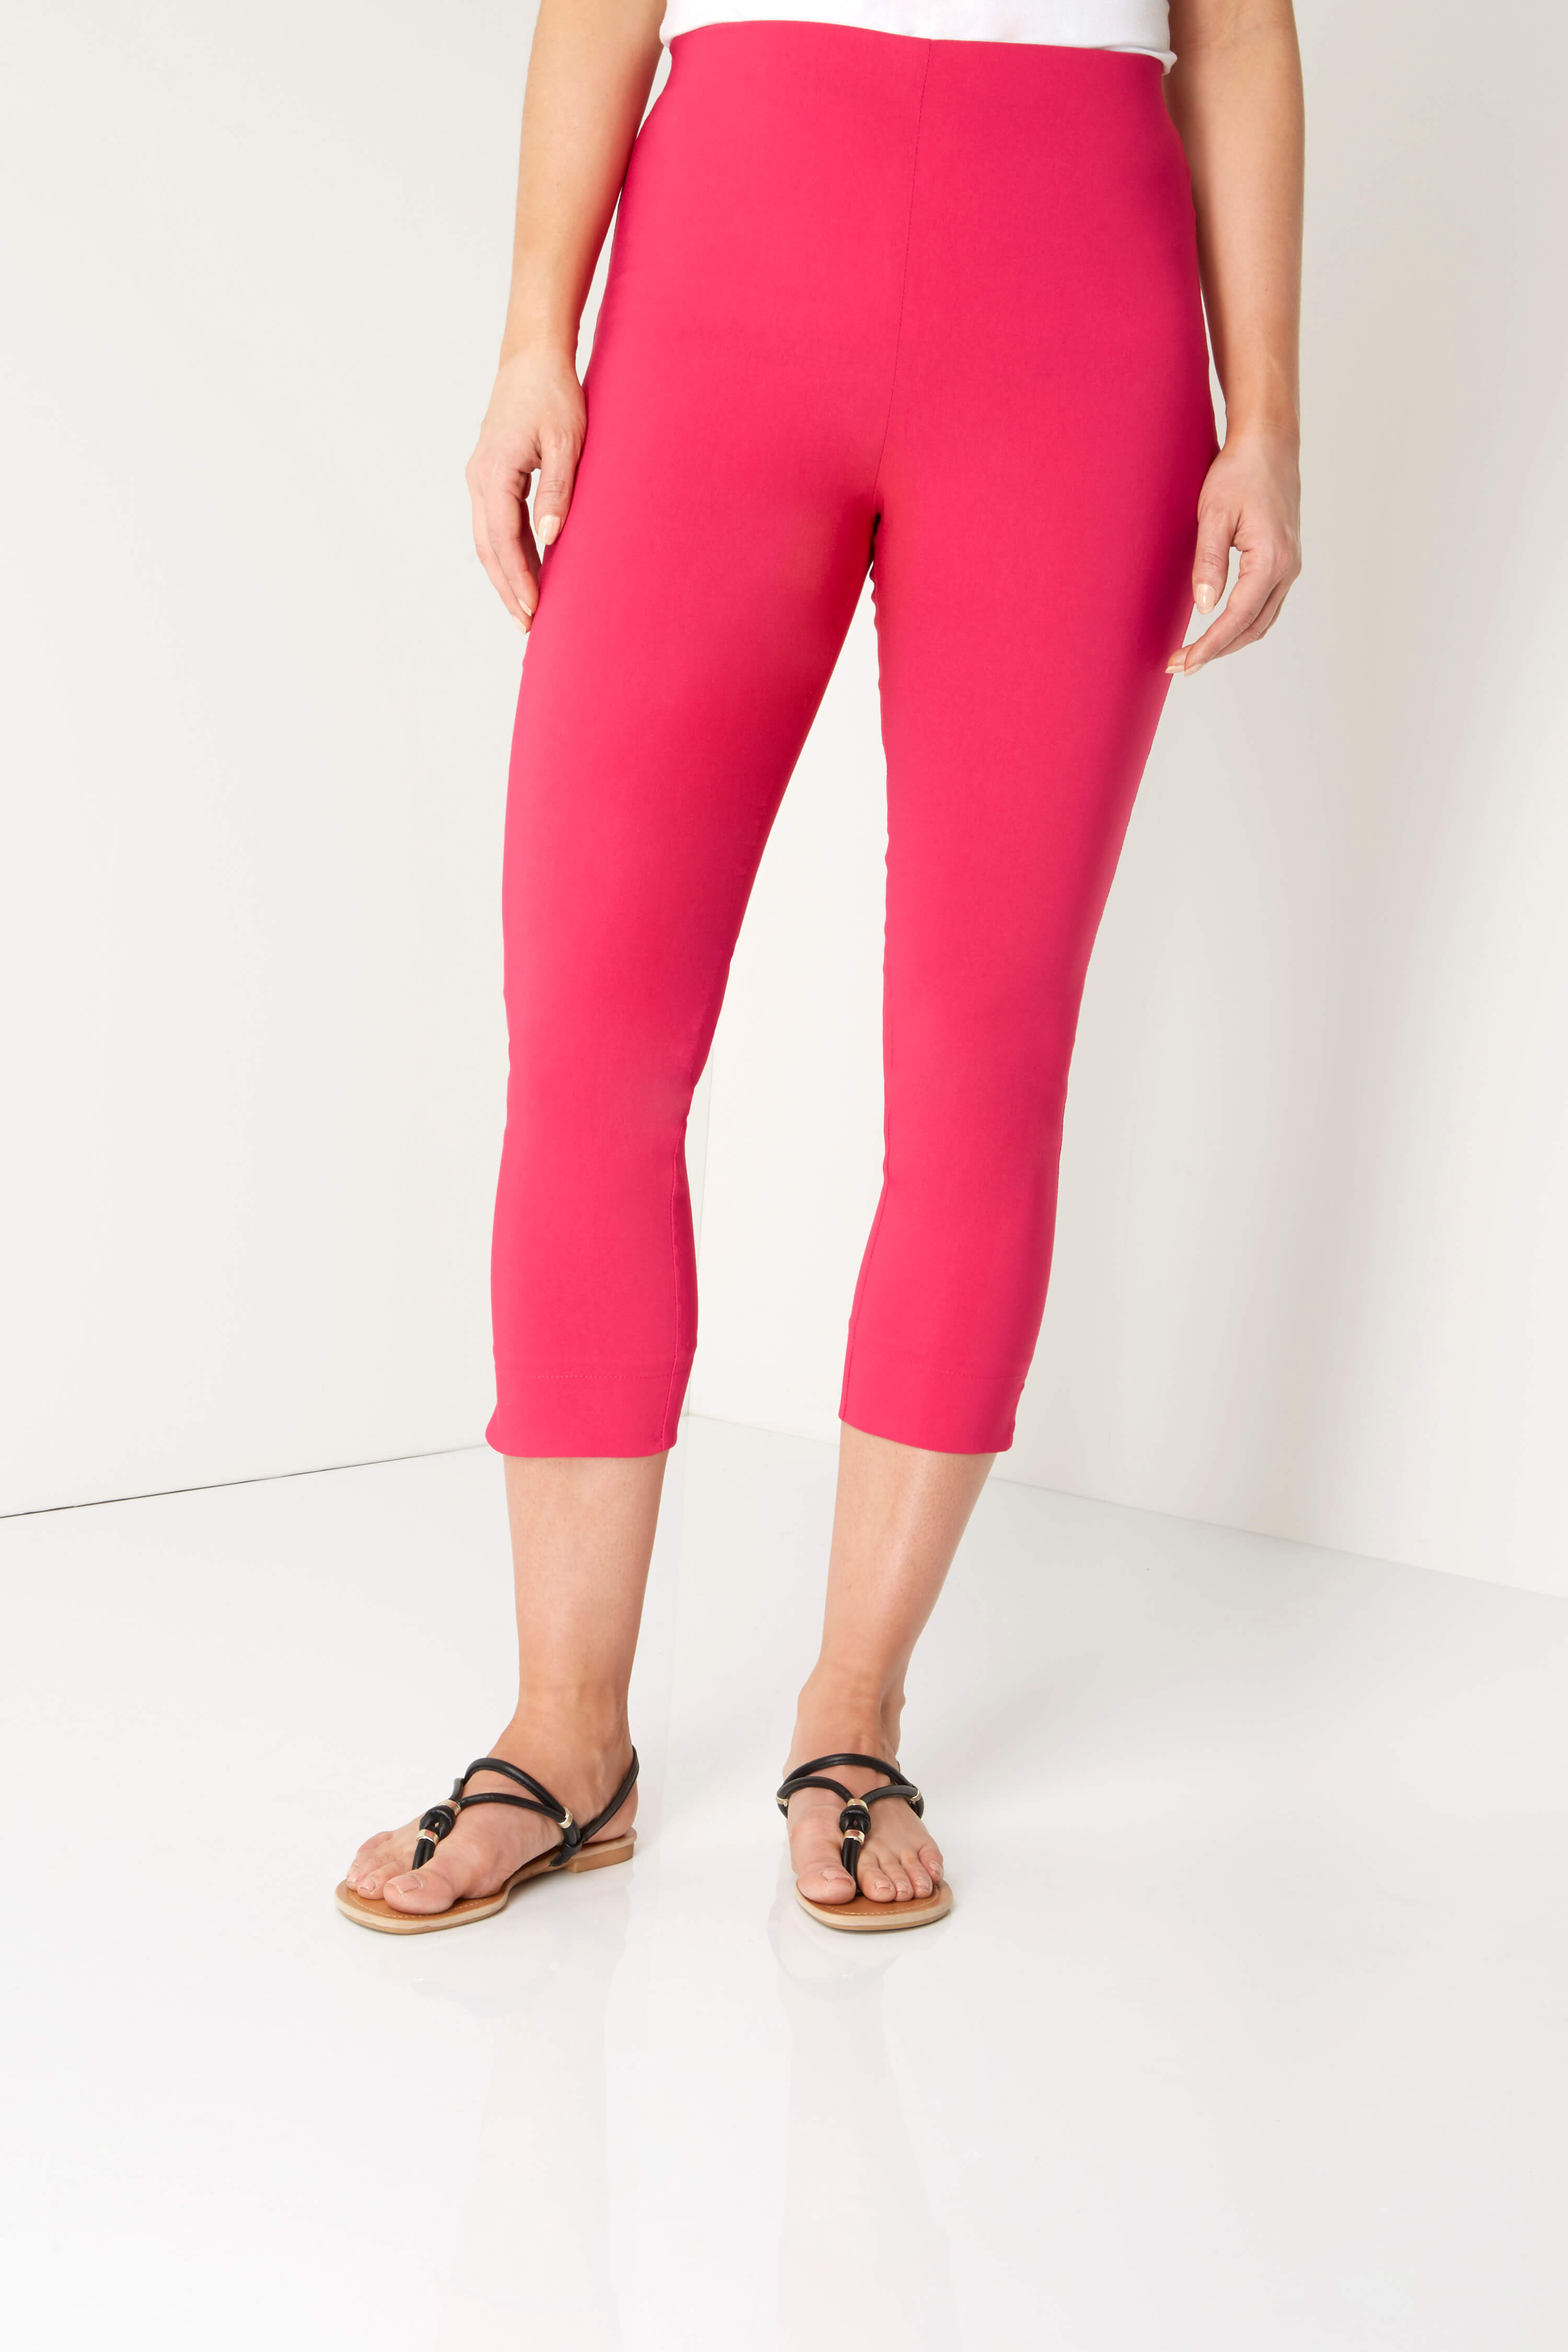 Fuchsia Cropped Stretch Trouser, Image 2 of 4